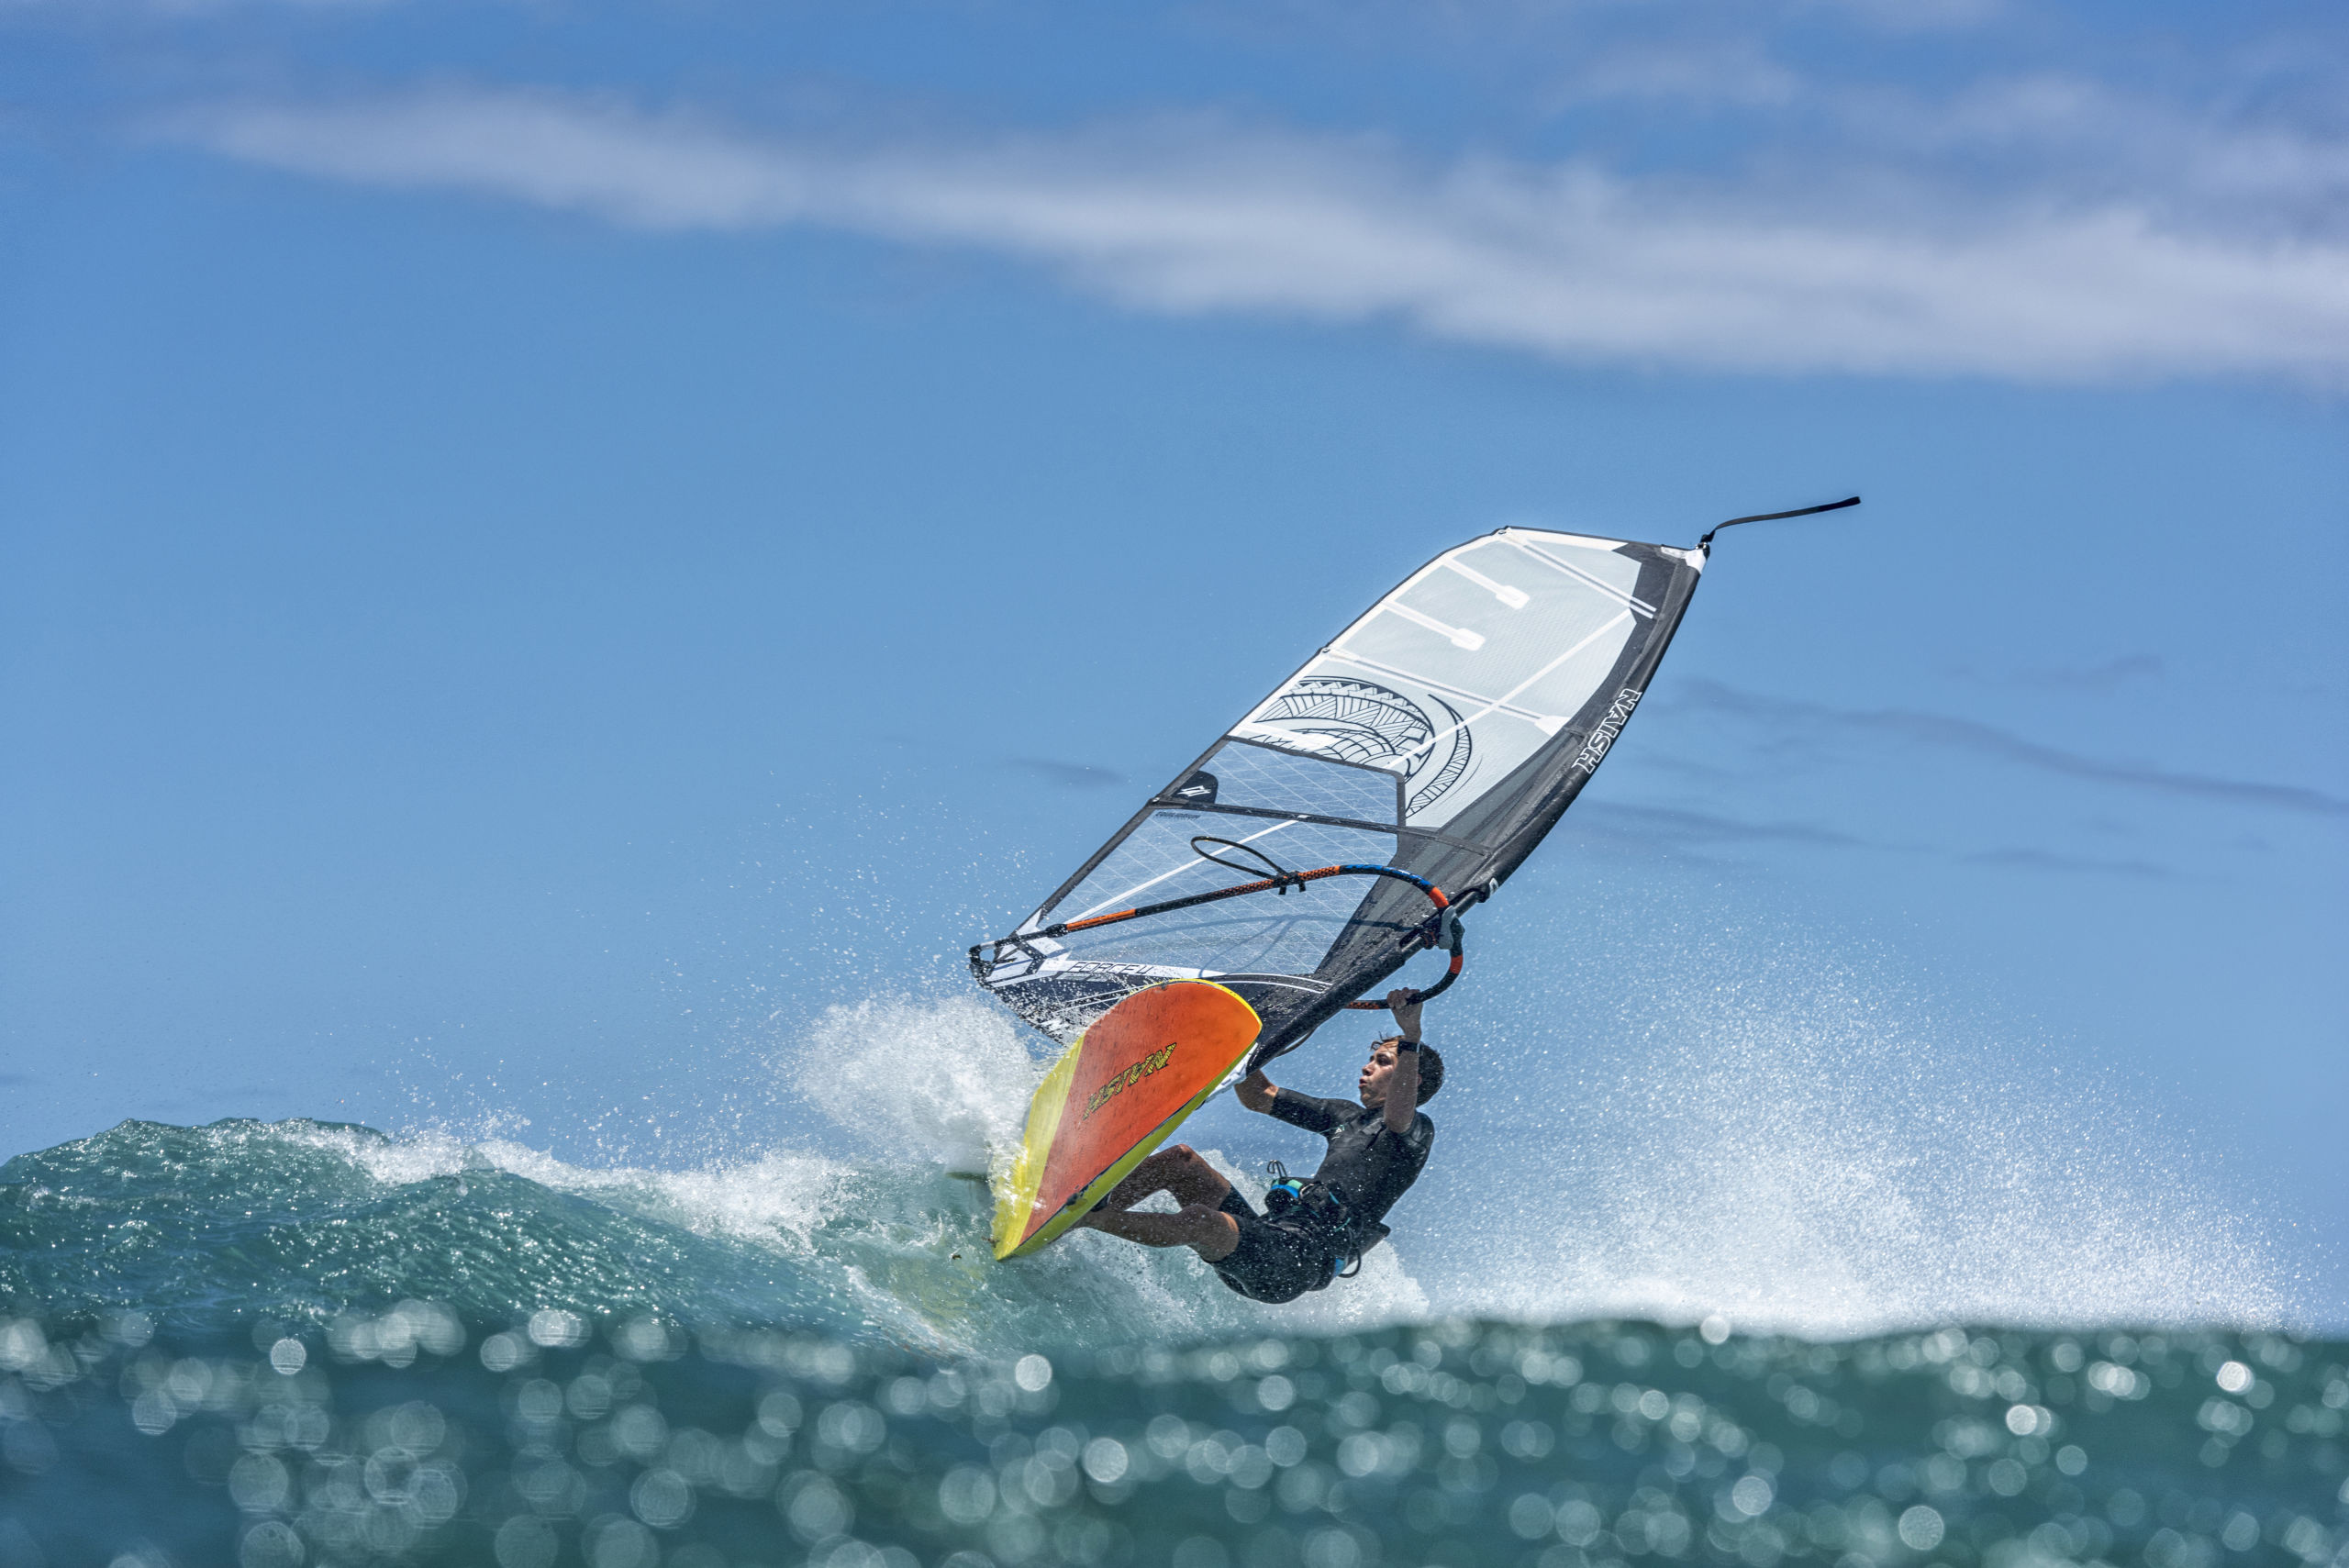 Windsurfing: Freestyle Windsurf Competition, Windsurf Masts, Easy Surf Shop, Windsurf Sails, Windsurf Boards. 2560x1710 HD Wallpaper.